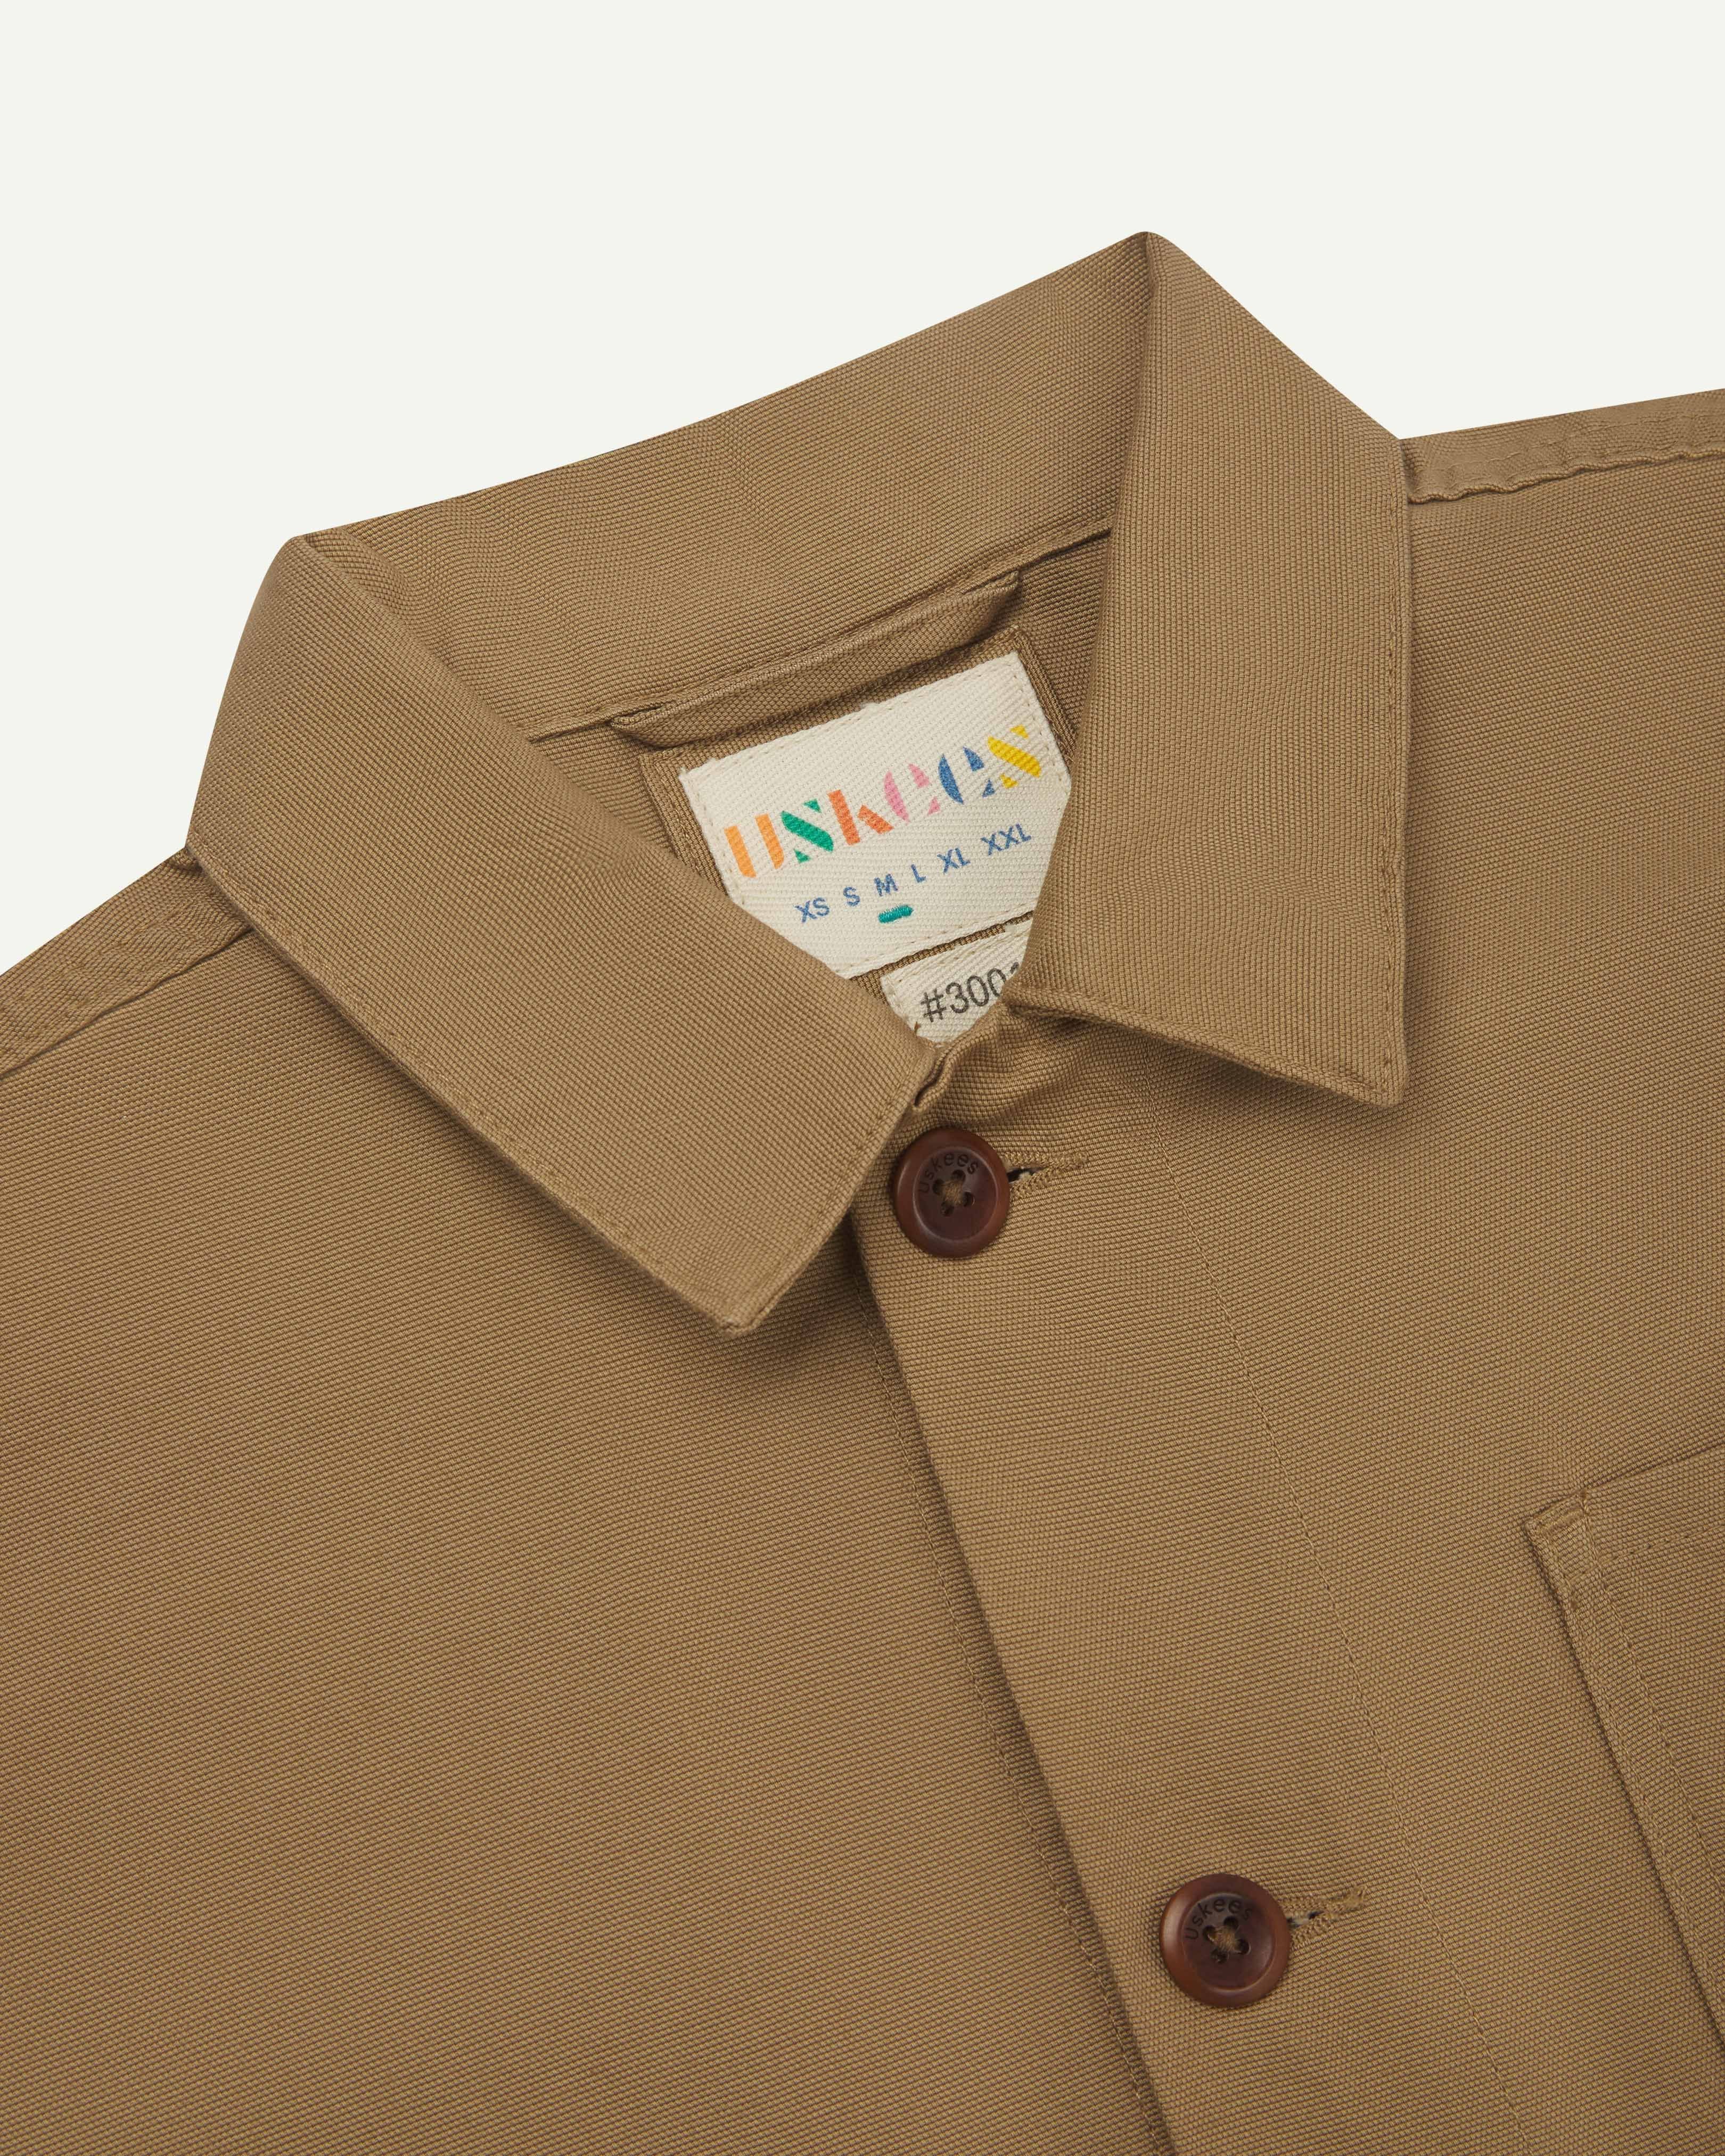 Front close-view of khaki buttoned shacket from Uskees. Showing neck label and corozo buttons.